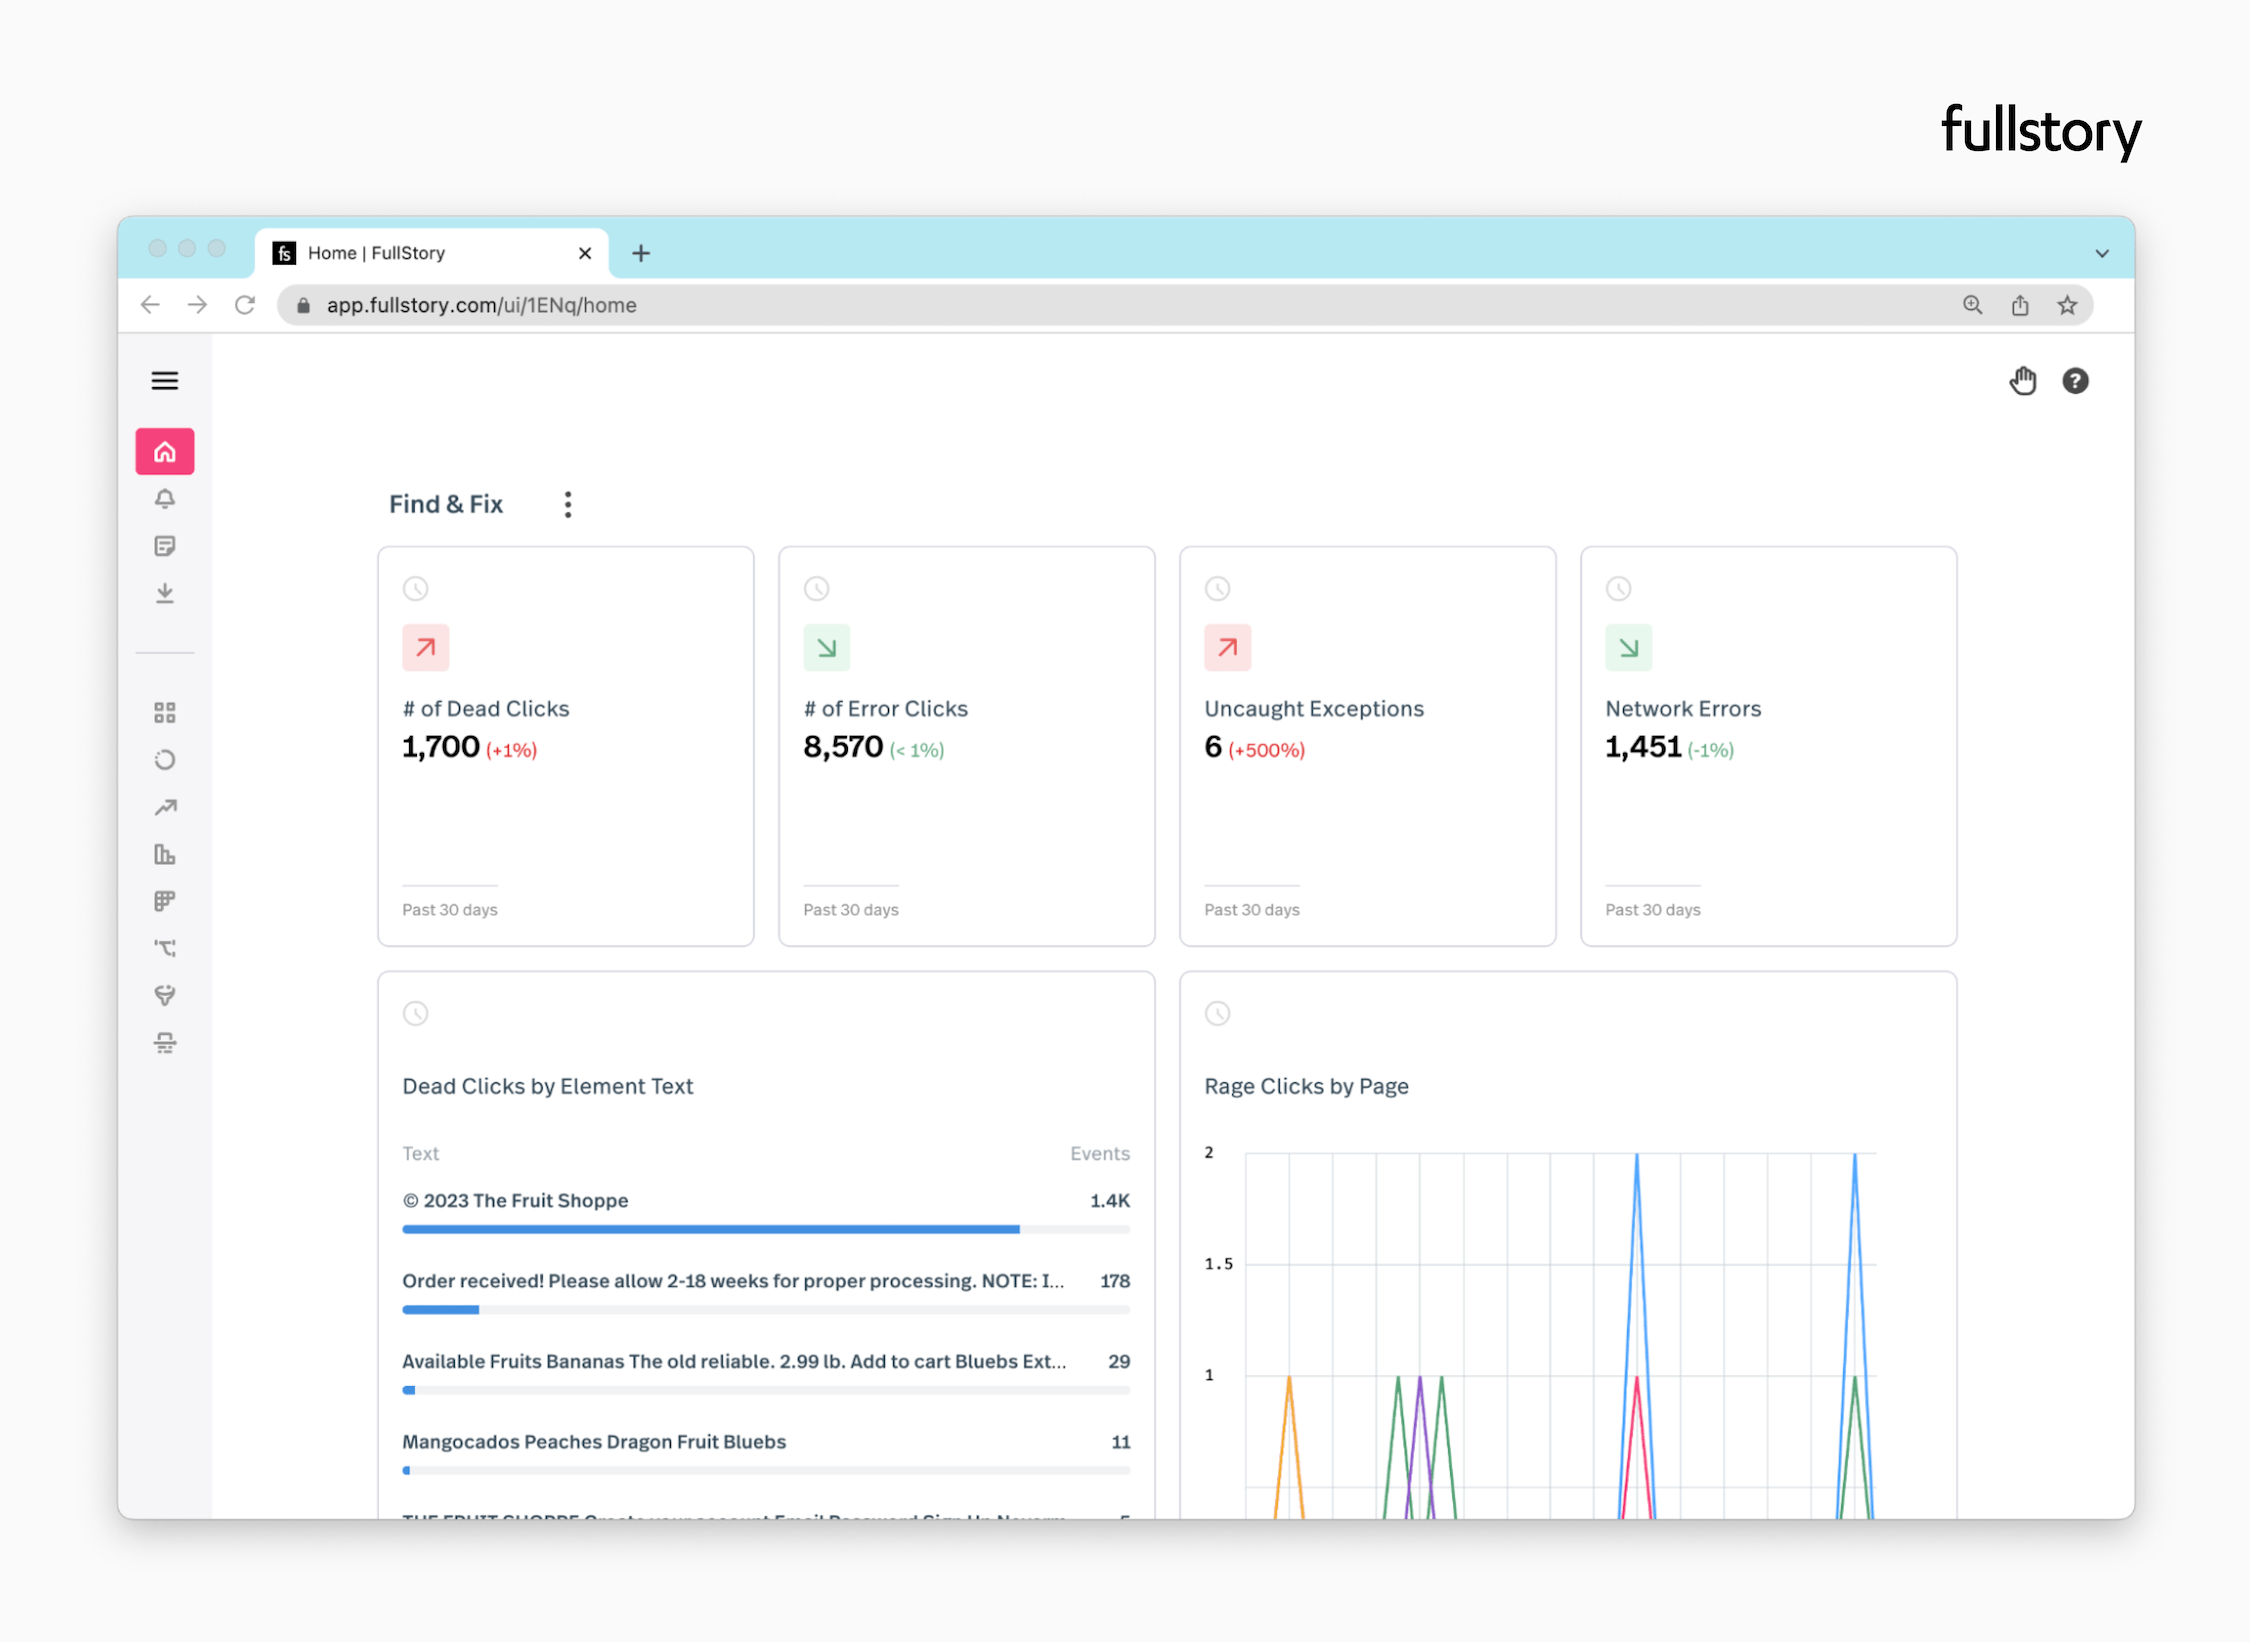 A FullStory dashboard showing bugs on a website, including errors clicks, dead clicks, rage clicks, uncaught exceptions, and network errors.